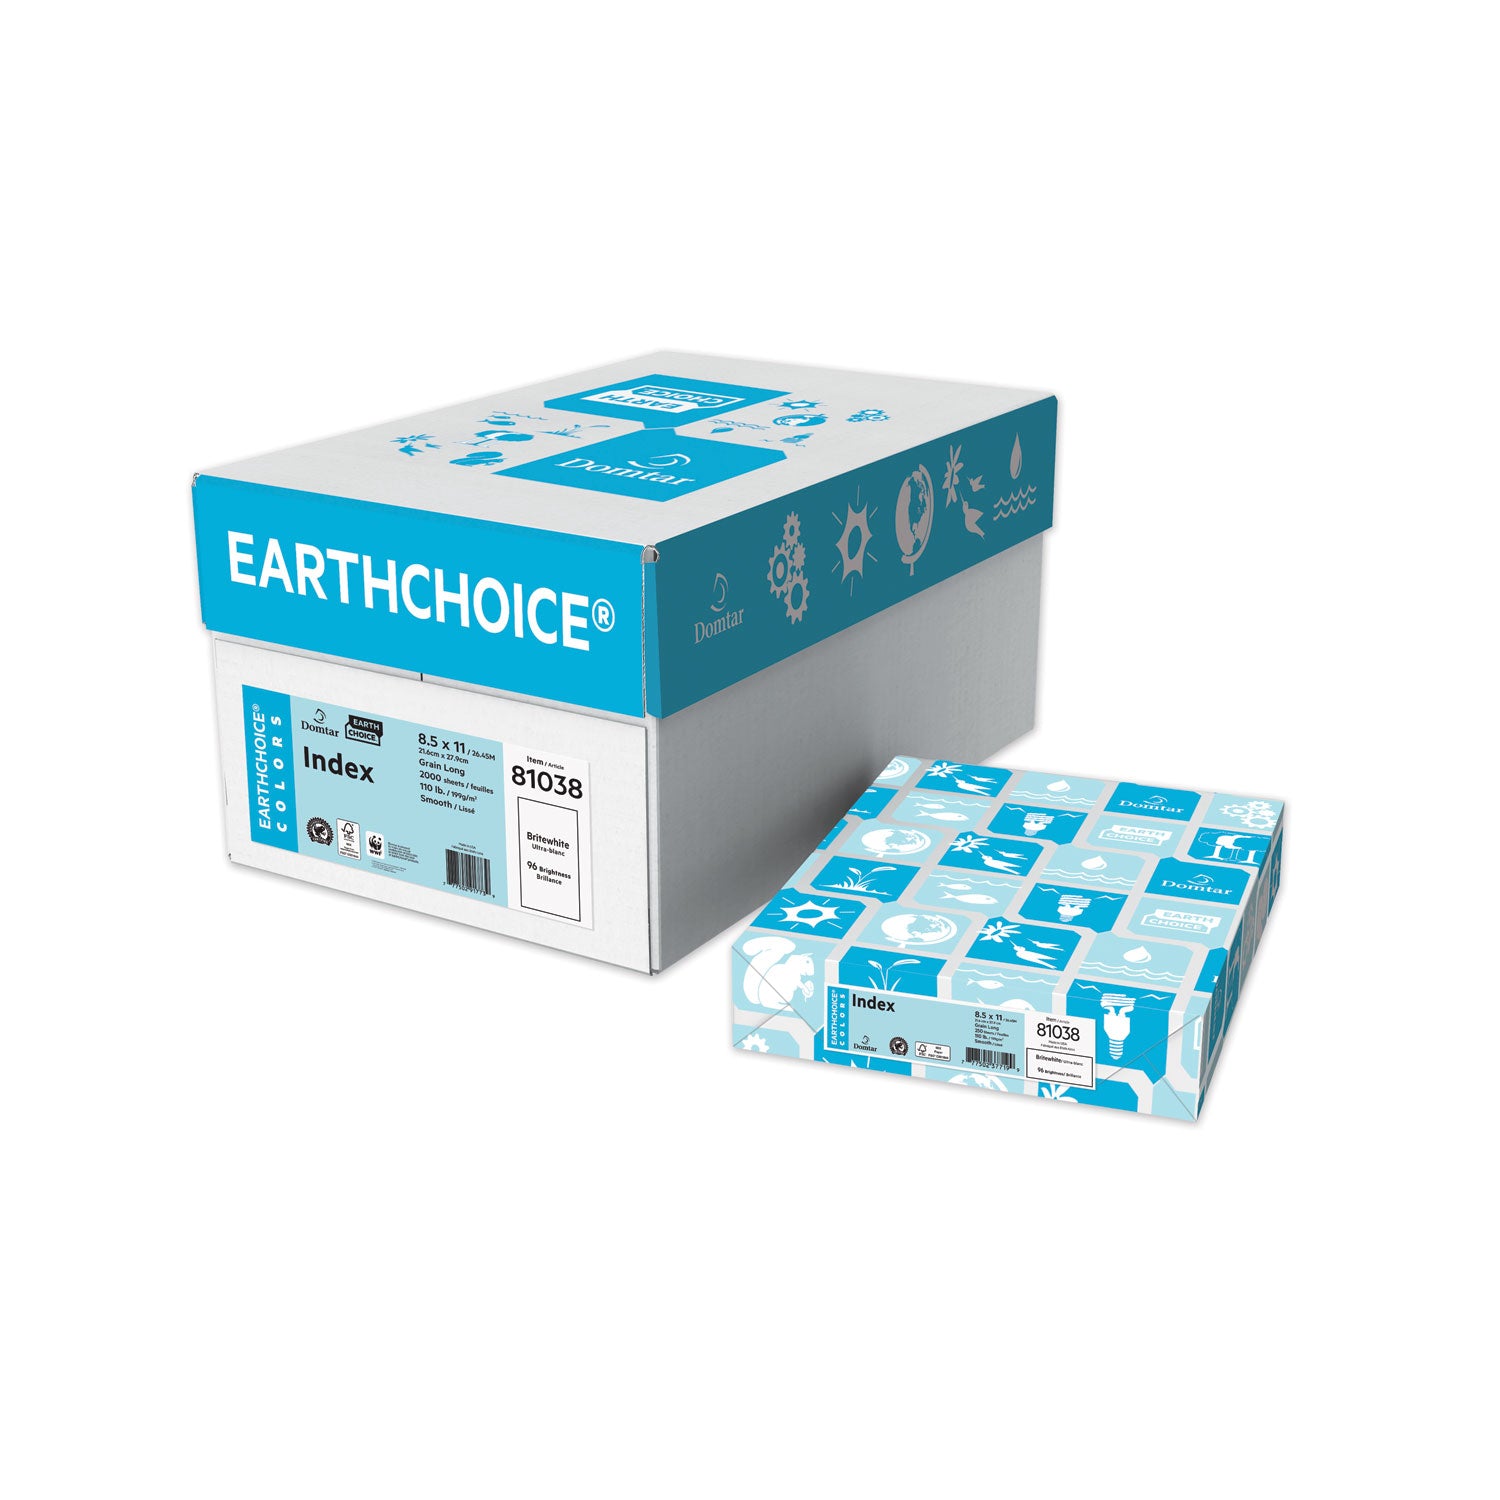 earthchoice-cover-stock-index-96-bright-110-lb-index-weight-85-x-11-bright-white-250-pack_dmr81038 - 1